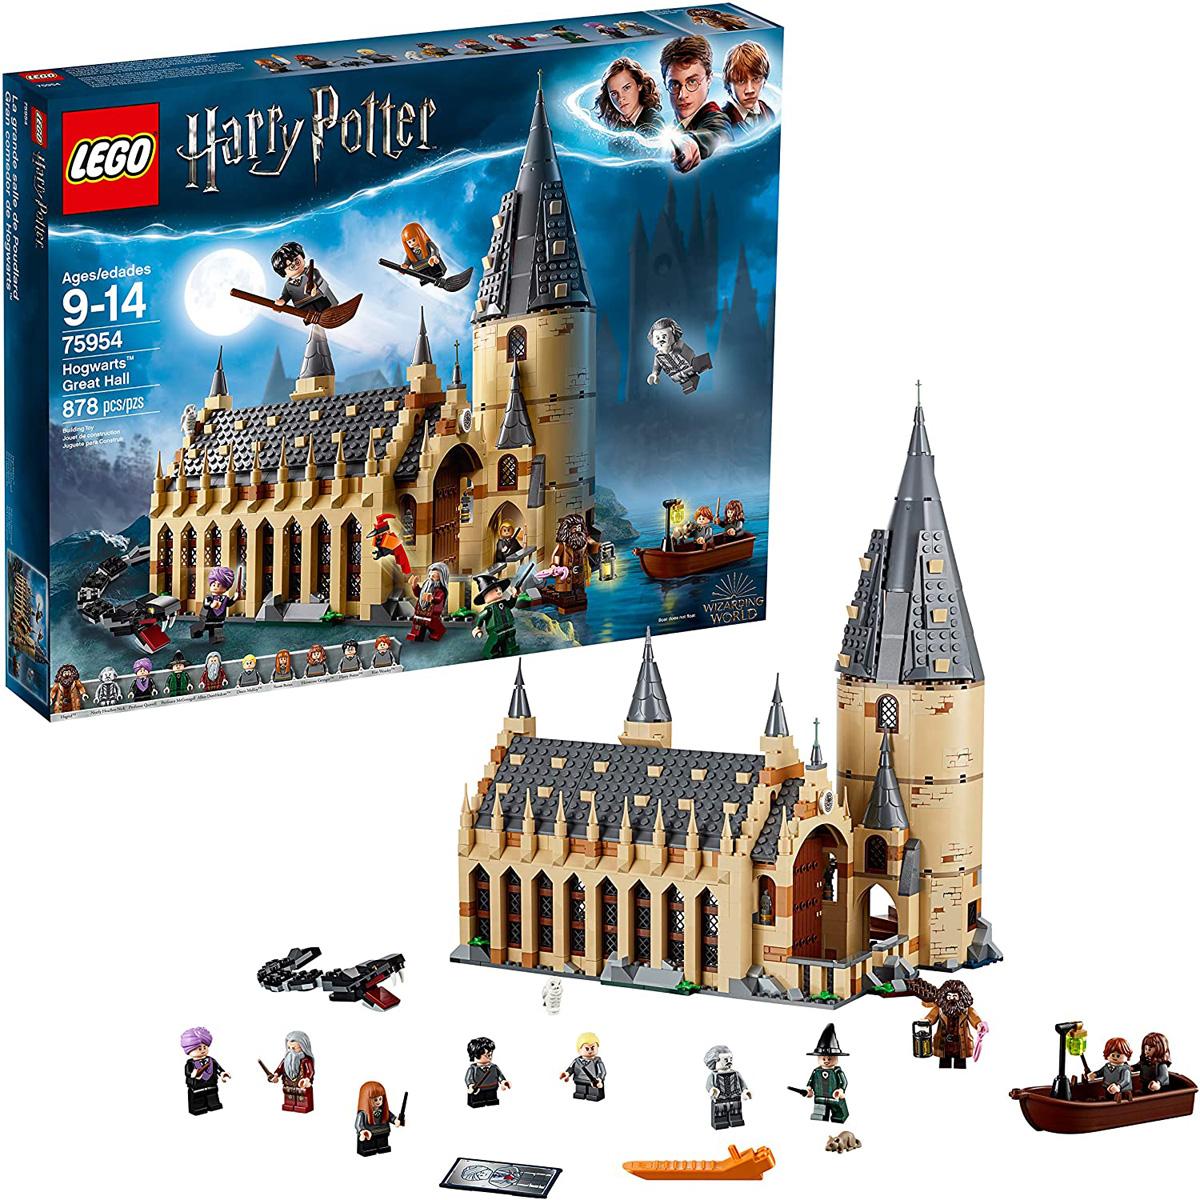 LEGO Harry Potter Hogwarts Great Hall 75954 for $59.99 Shipped